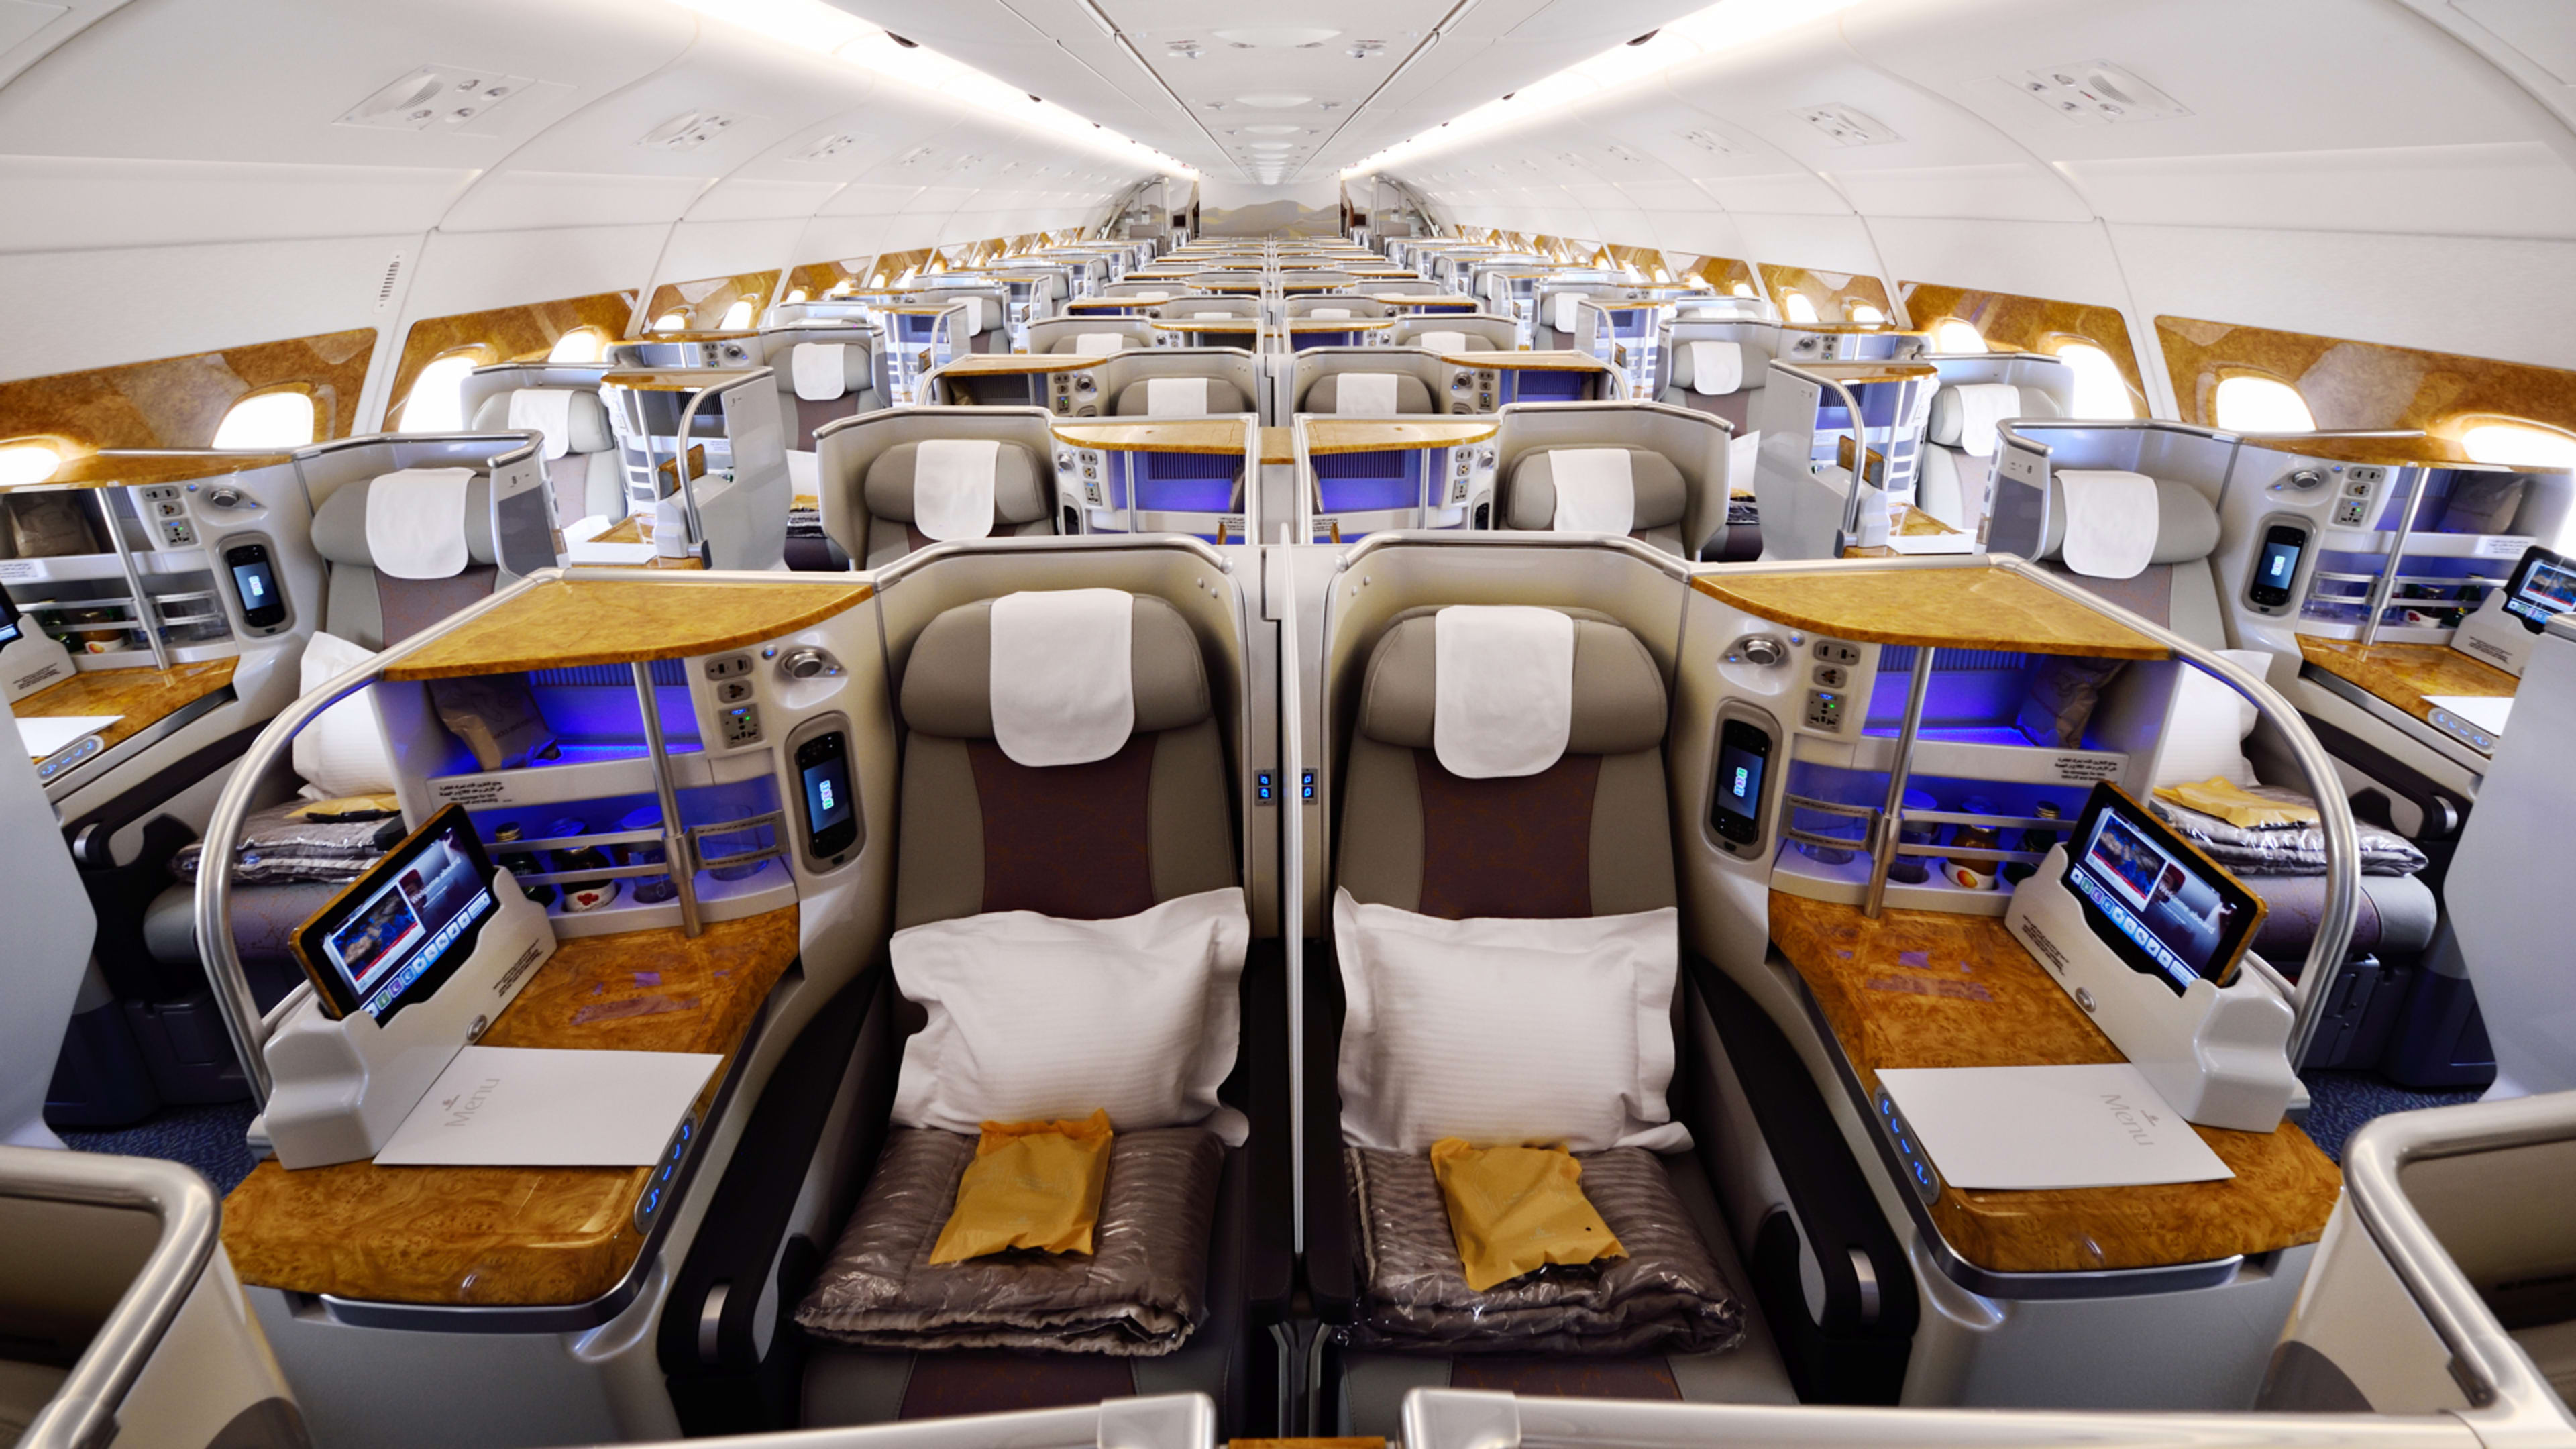 Emirates Airline just made business class slightly more affordable